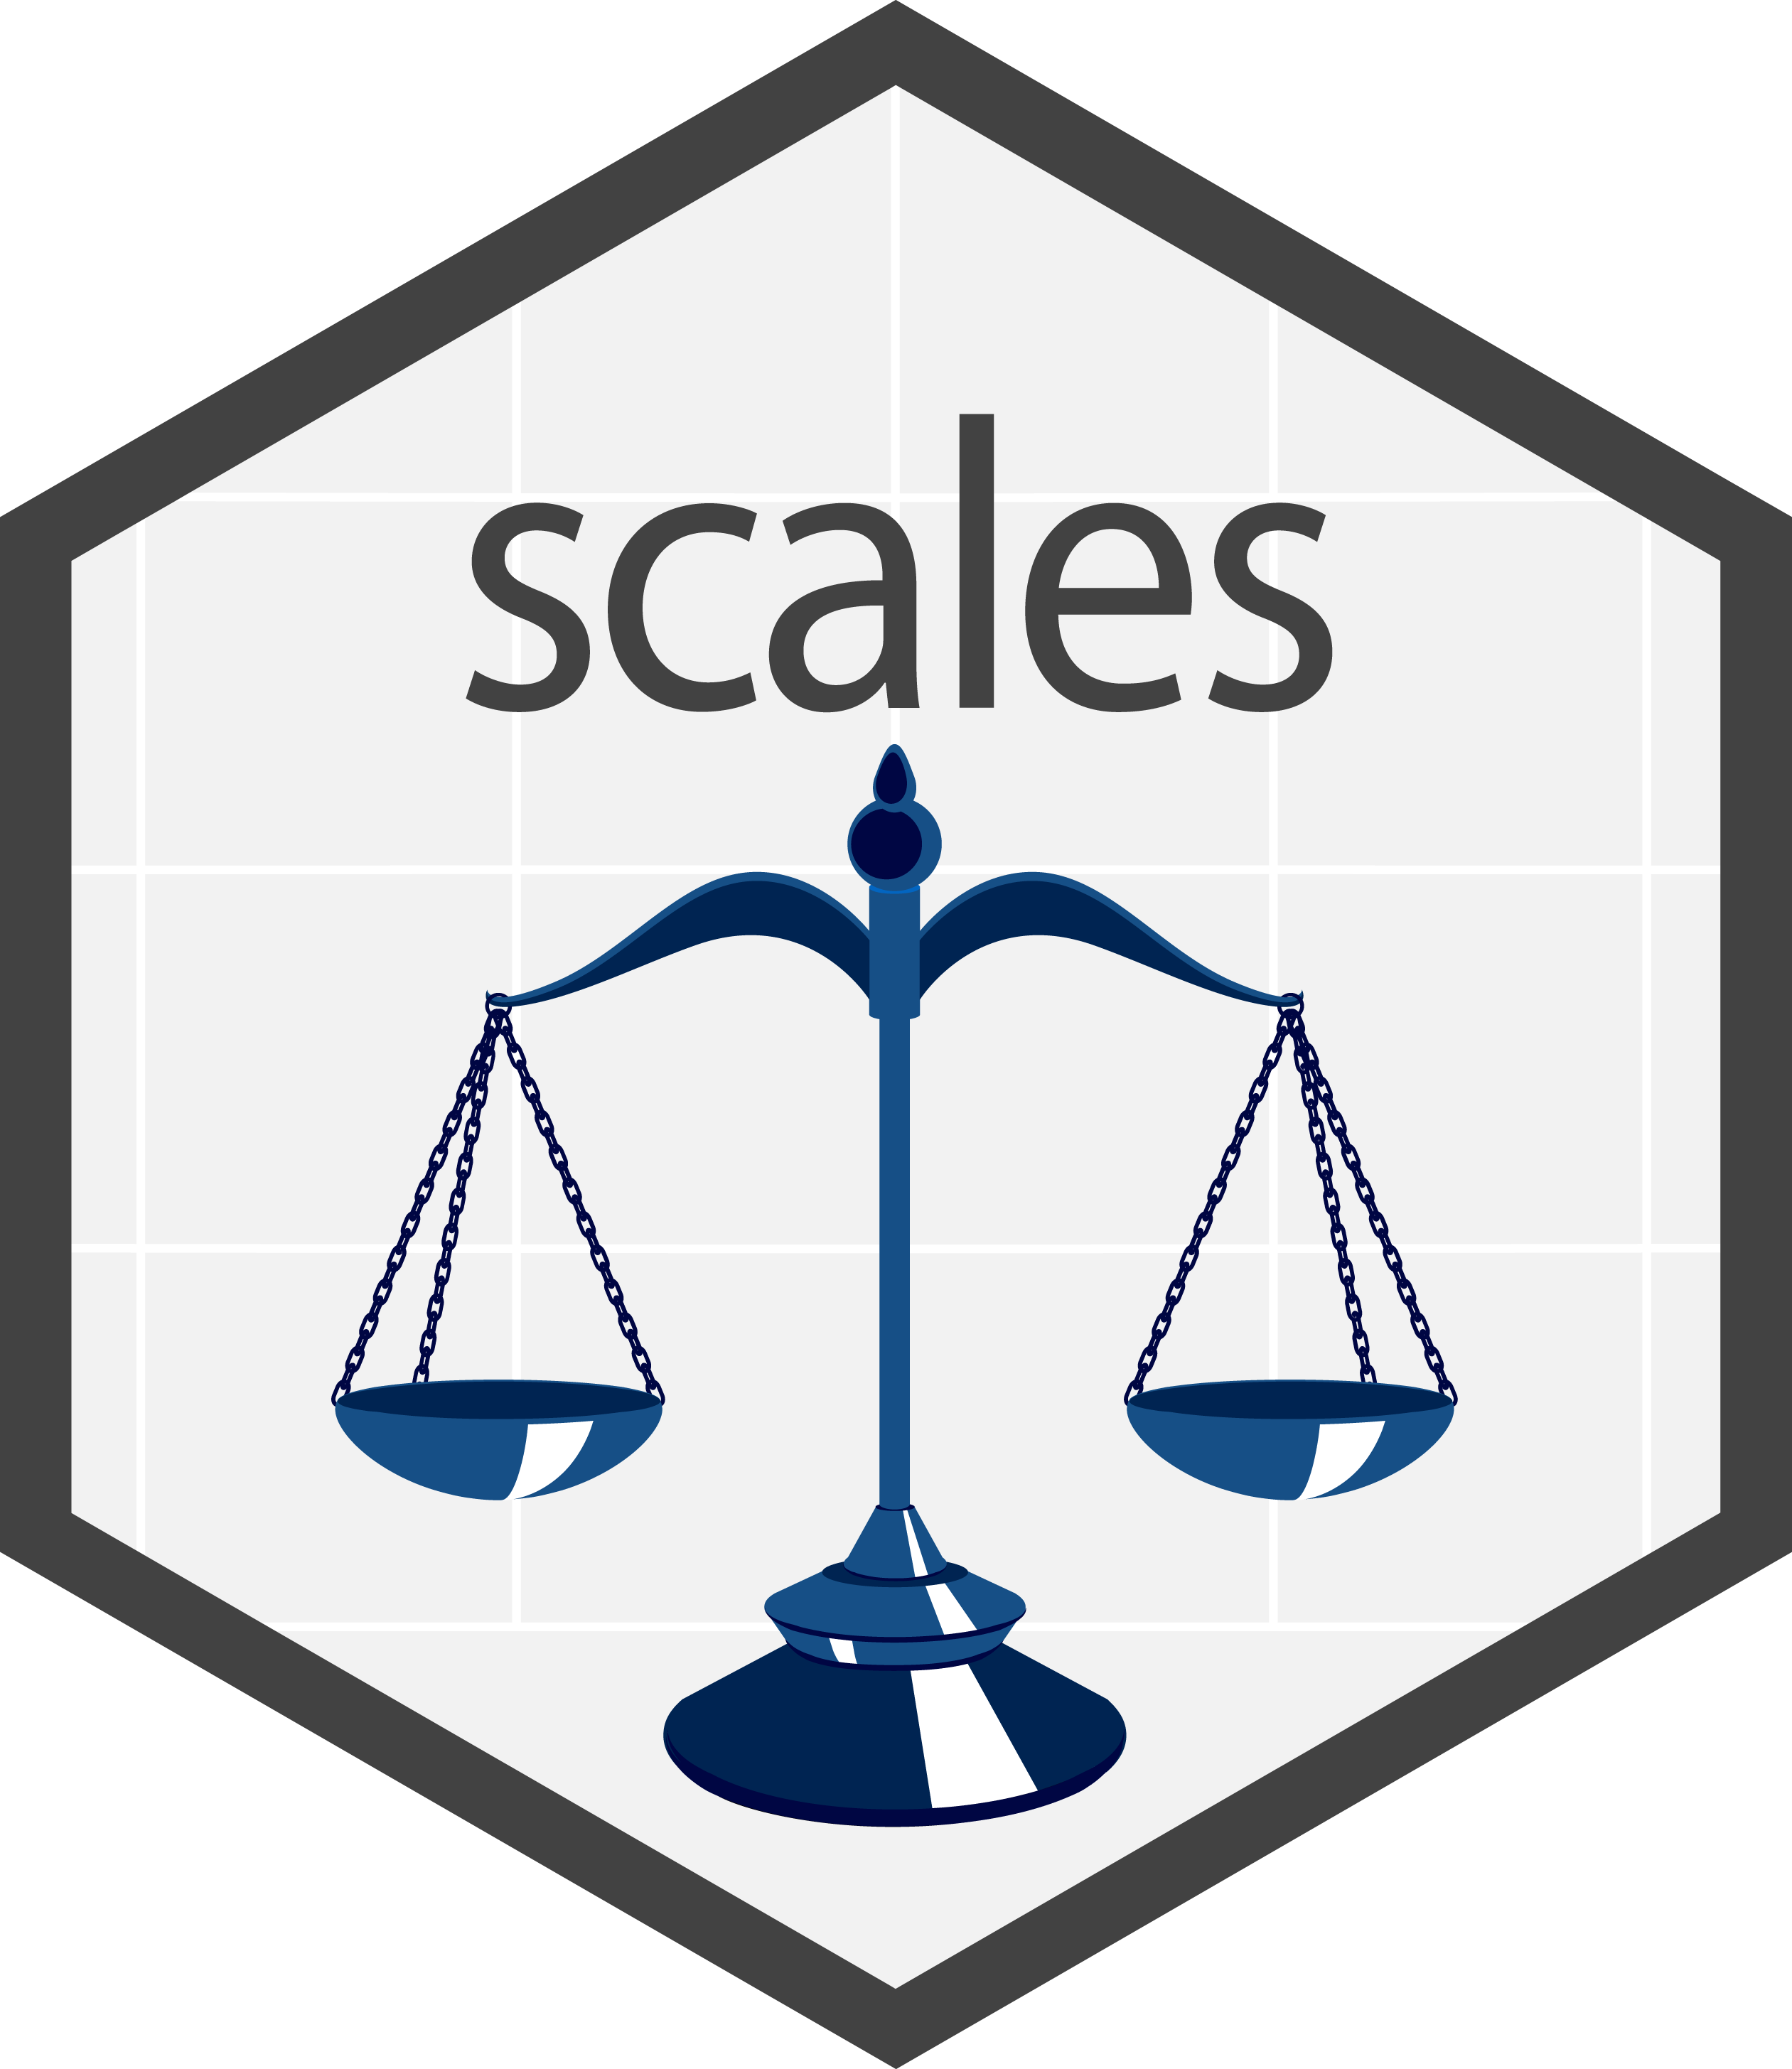 scales.png